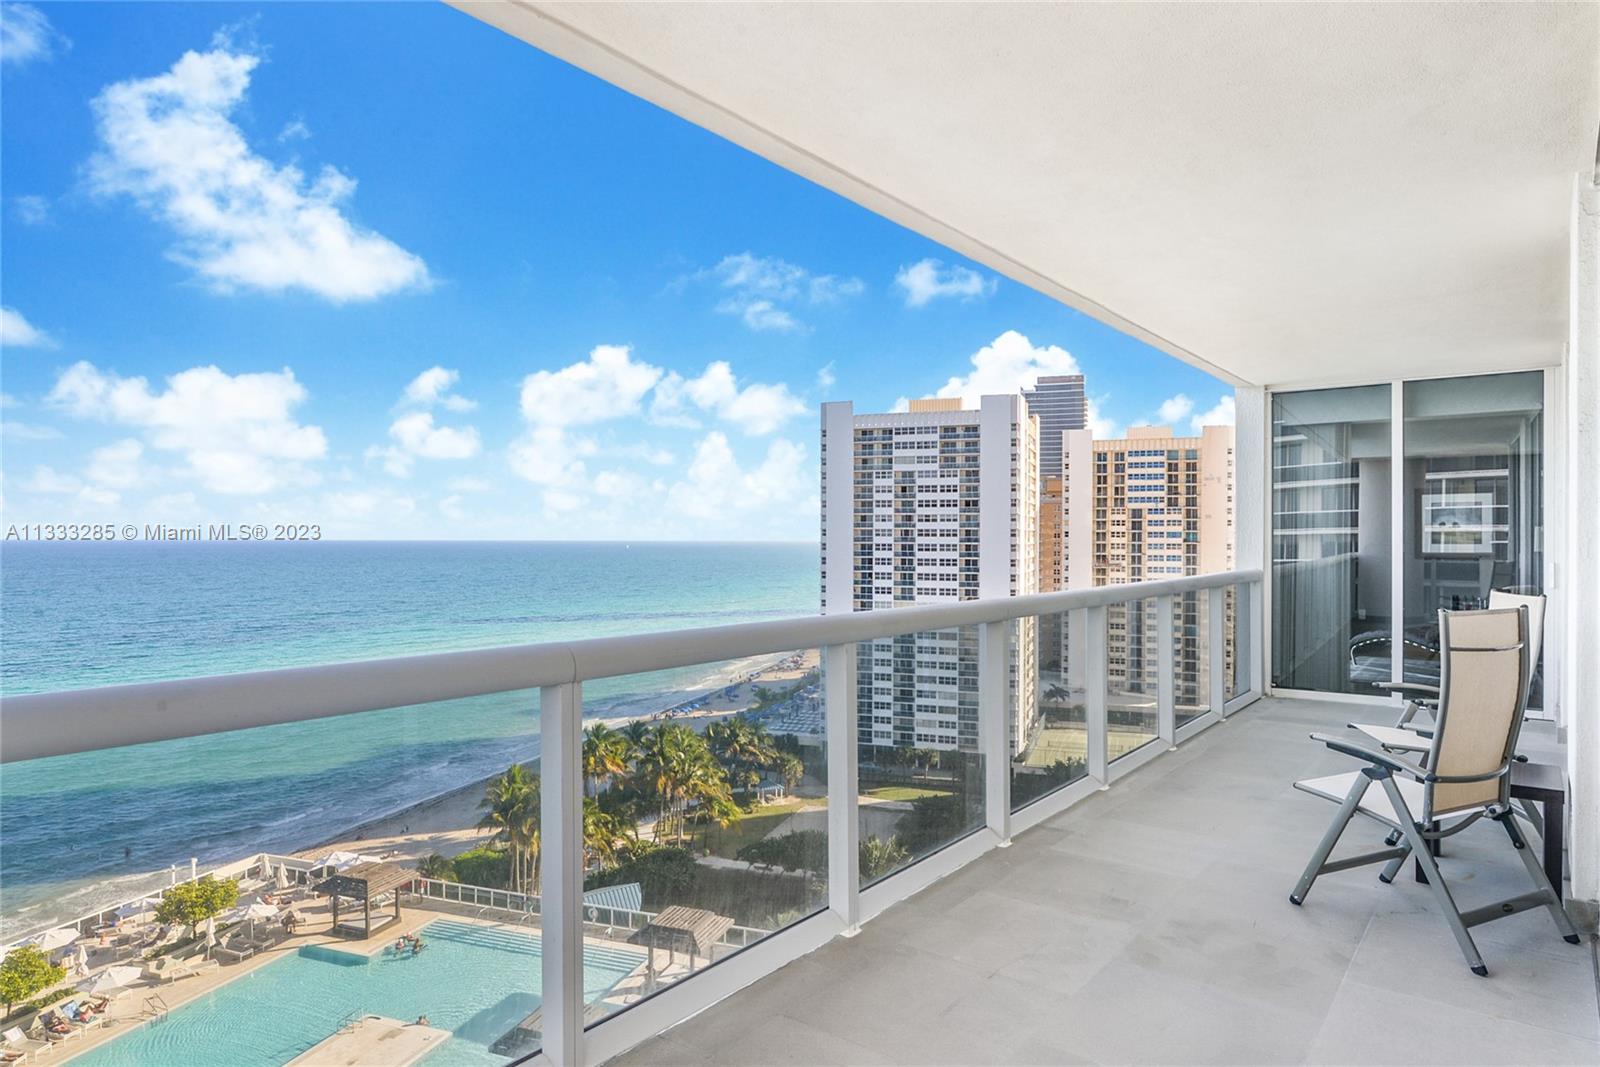 Large corner unit with direct Ocean views. Spacious 3 Bed / 3.5 Bath with oversized terrace, grey ceramic floors in the living areas and wood in the bedrooms. BEST Priced 3 Bedroom in the Building. 24 Hour security and front desk, state of the art gym and spa, pool and beach service, restaurant in pool area, etc.